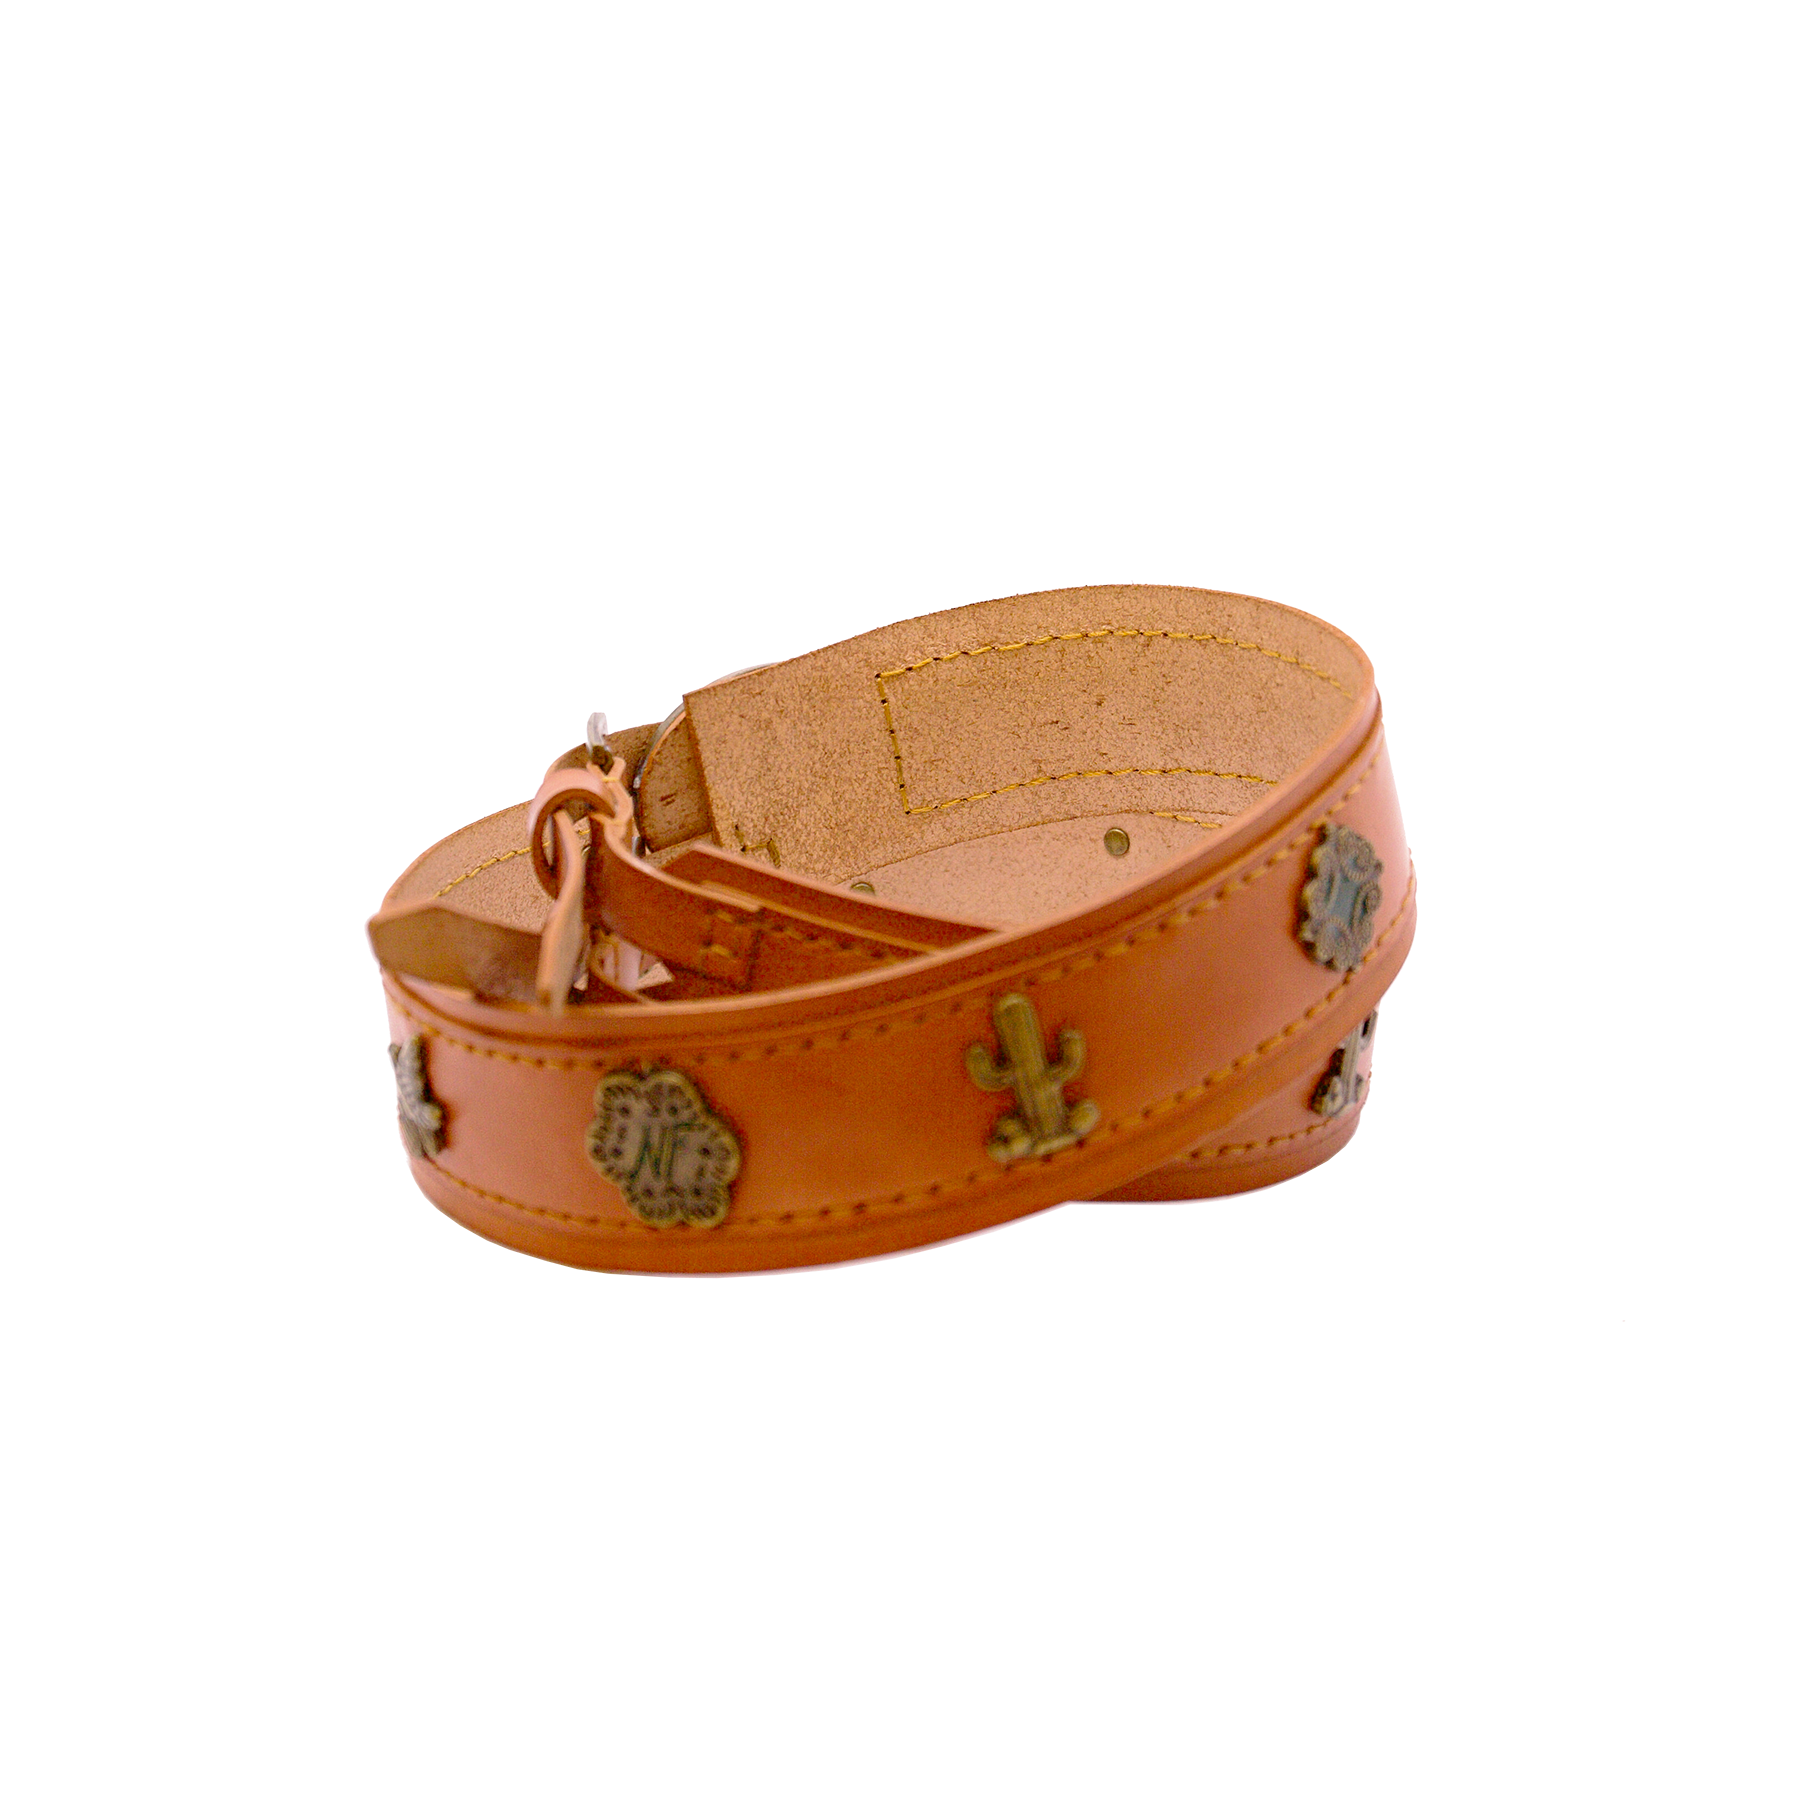 Vegetable tanned saddle leather belt in natural Double brass buckle NF icon conchos